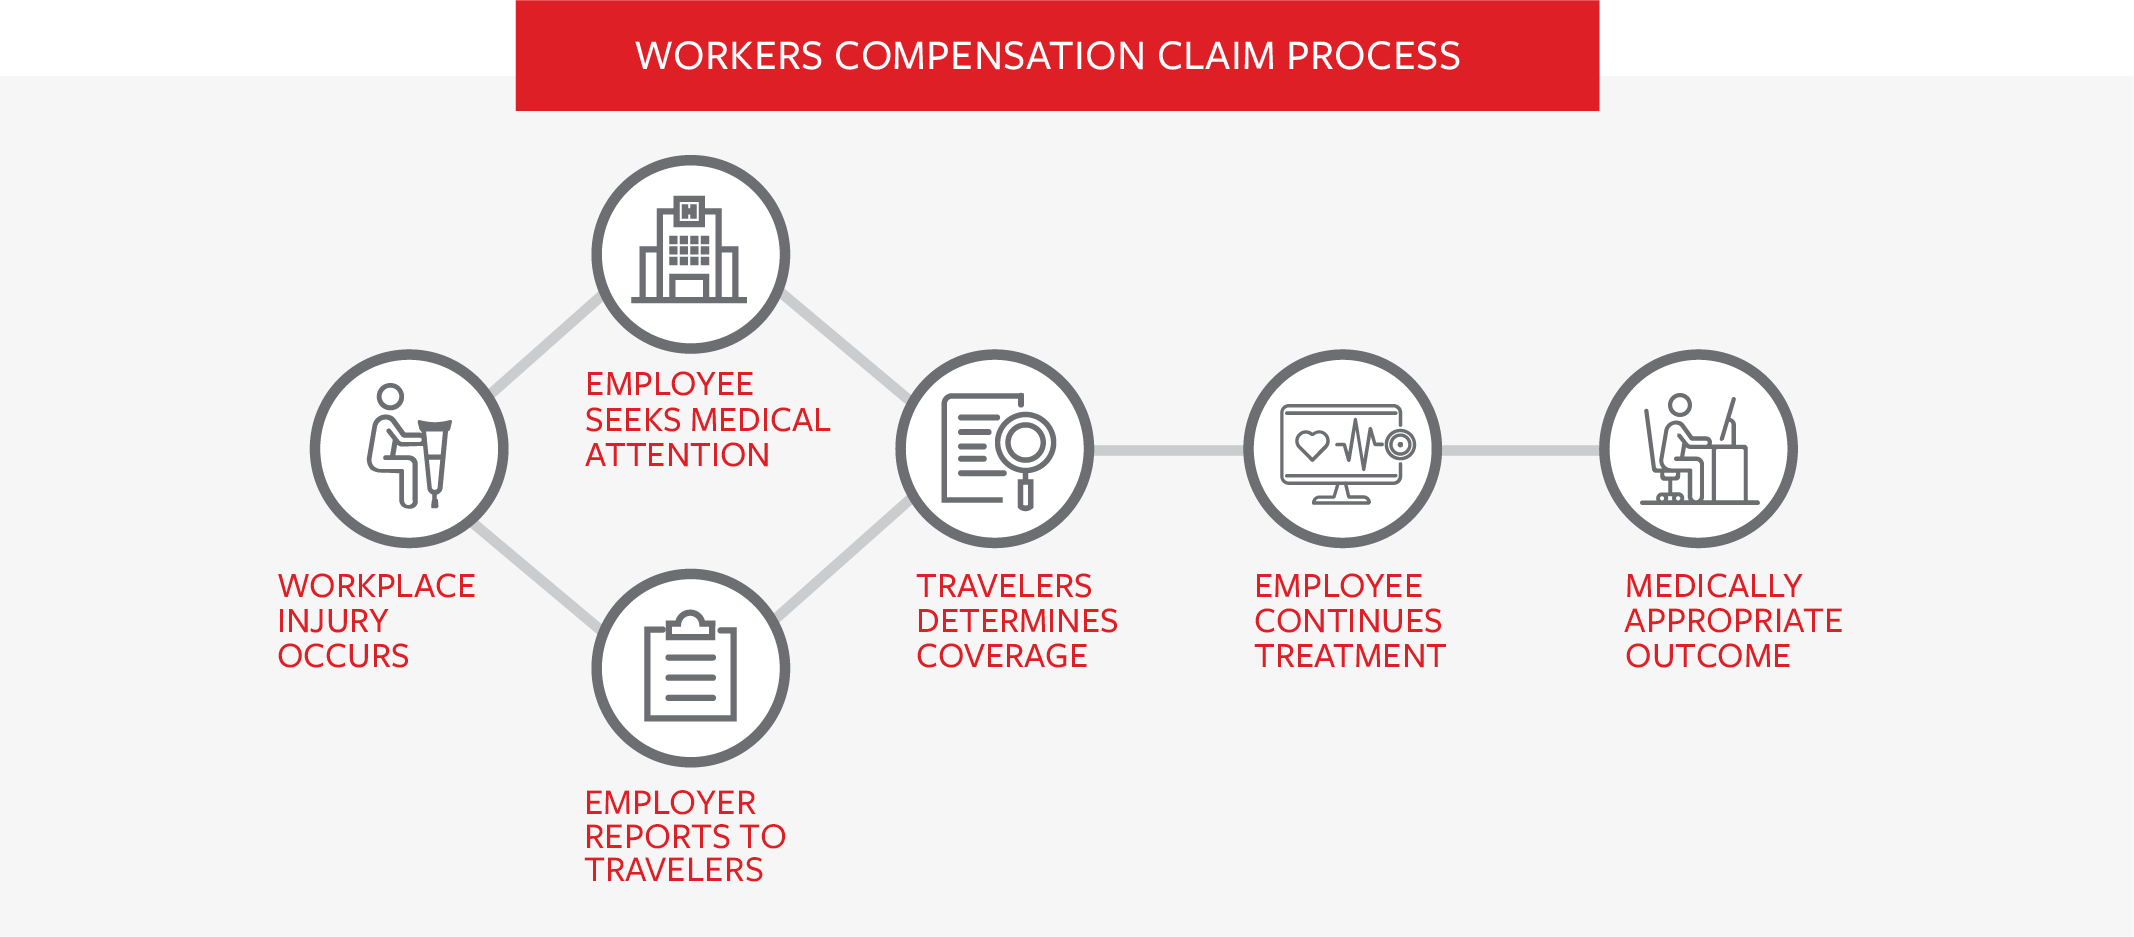 Workers Compensation Claim Process. After a workplace injury occurs, the employee seeks medical attention and the employer reports to Travelers. Then, Travelers determines coverage. The employee continues treatment, eventually leading to a medically appropriate outcome.